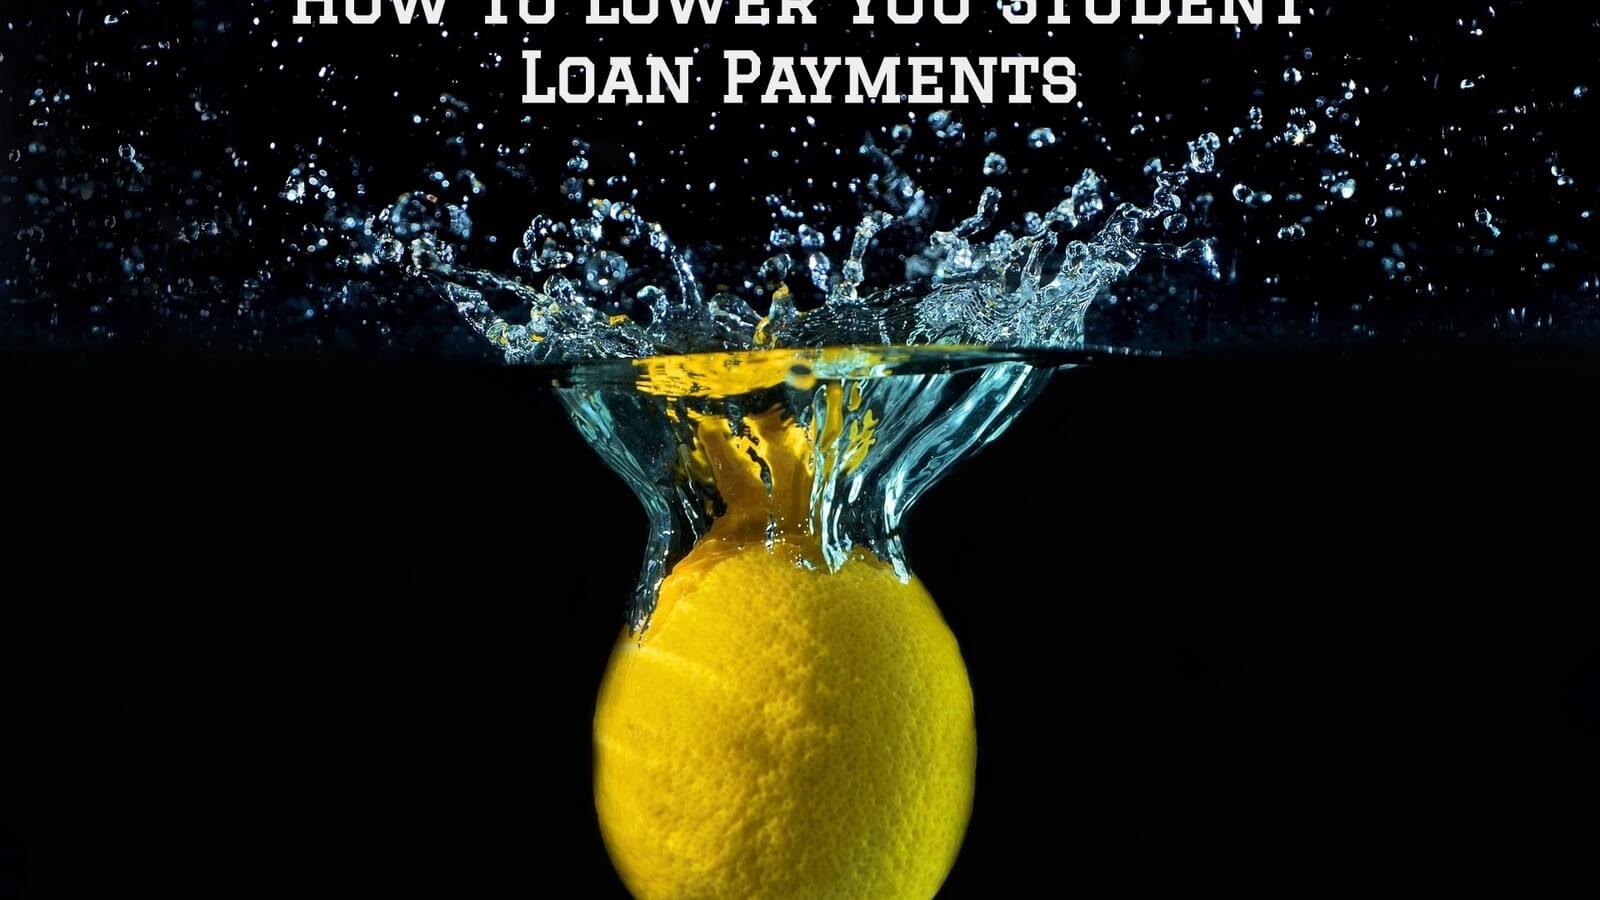 How to Lower Your Student Loan Payments